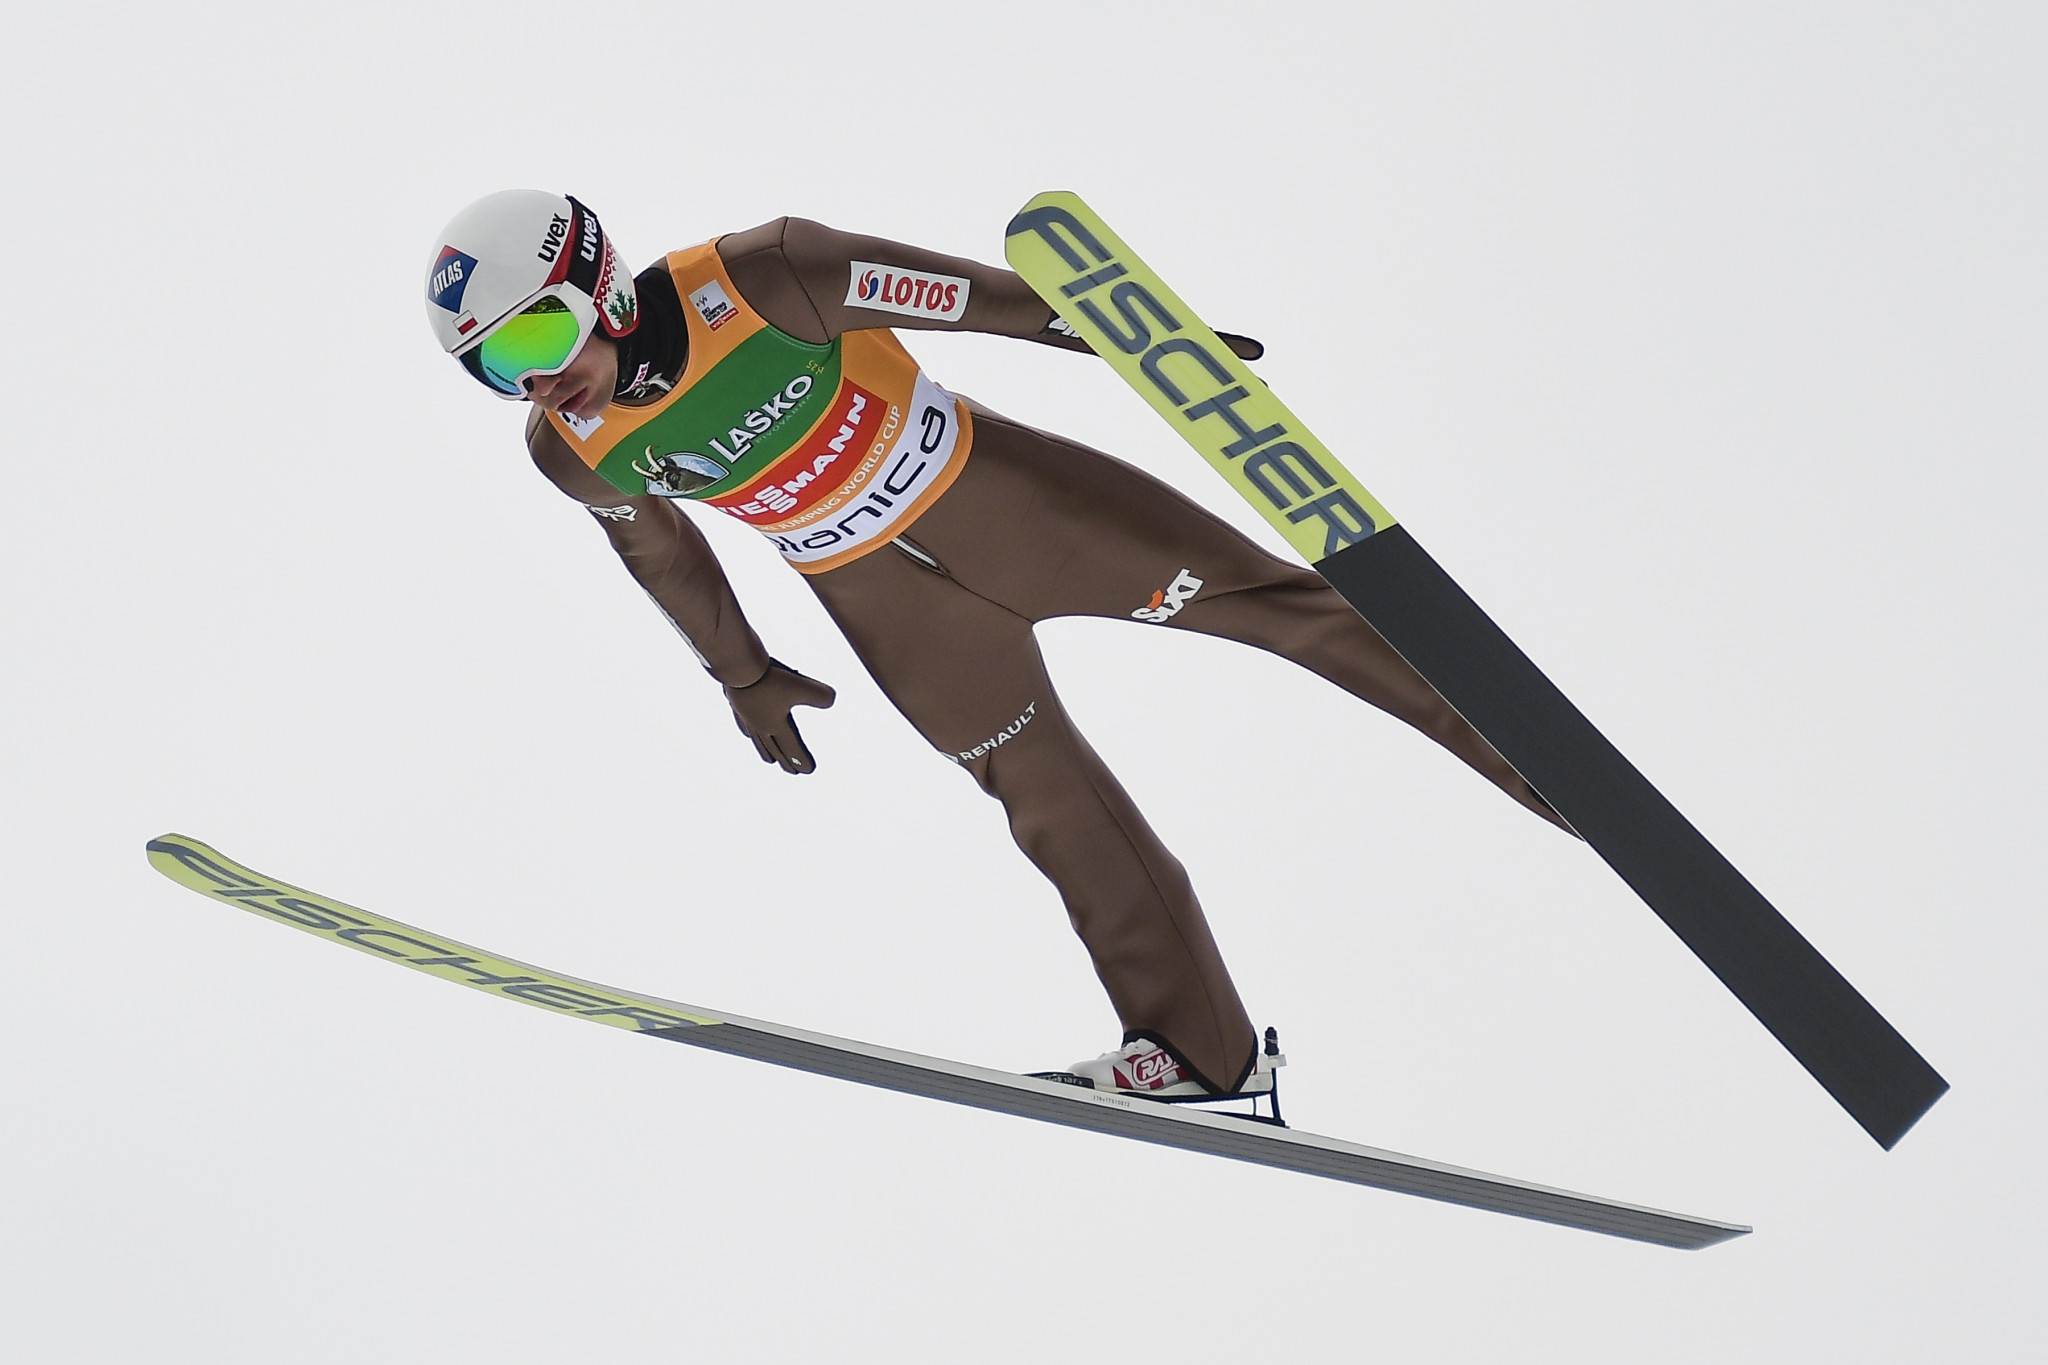  Stoch seeking third FIS Ski Jumping title as World Cup starts in Wisla